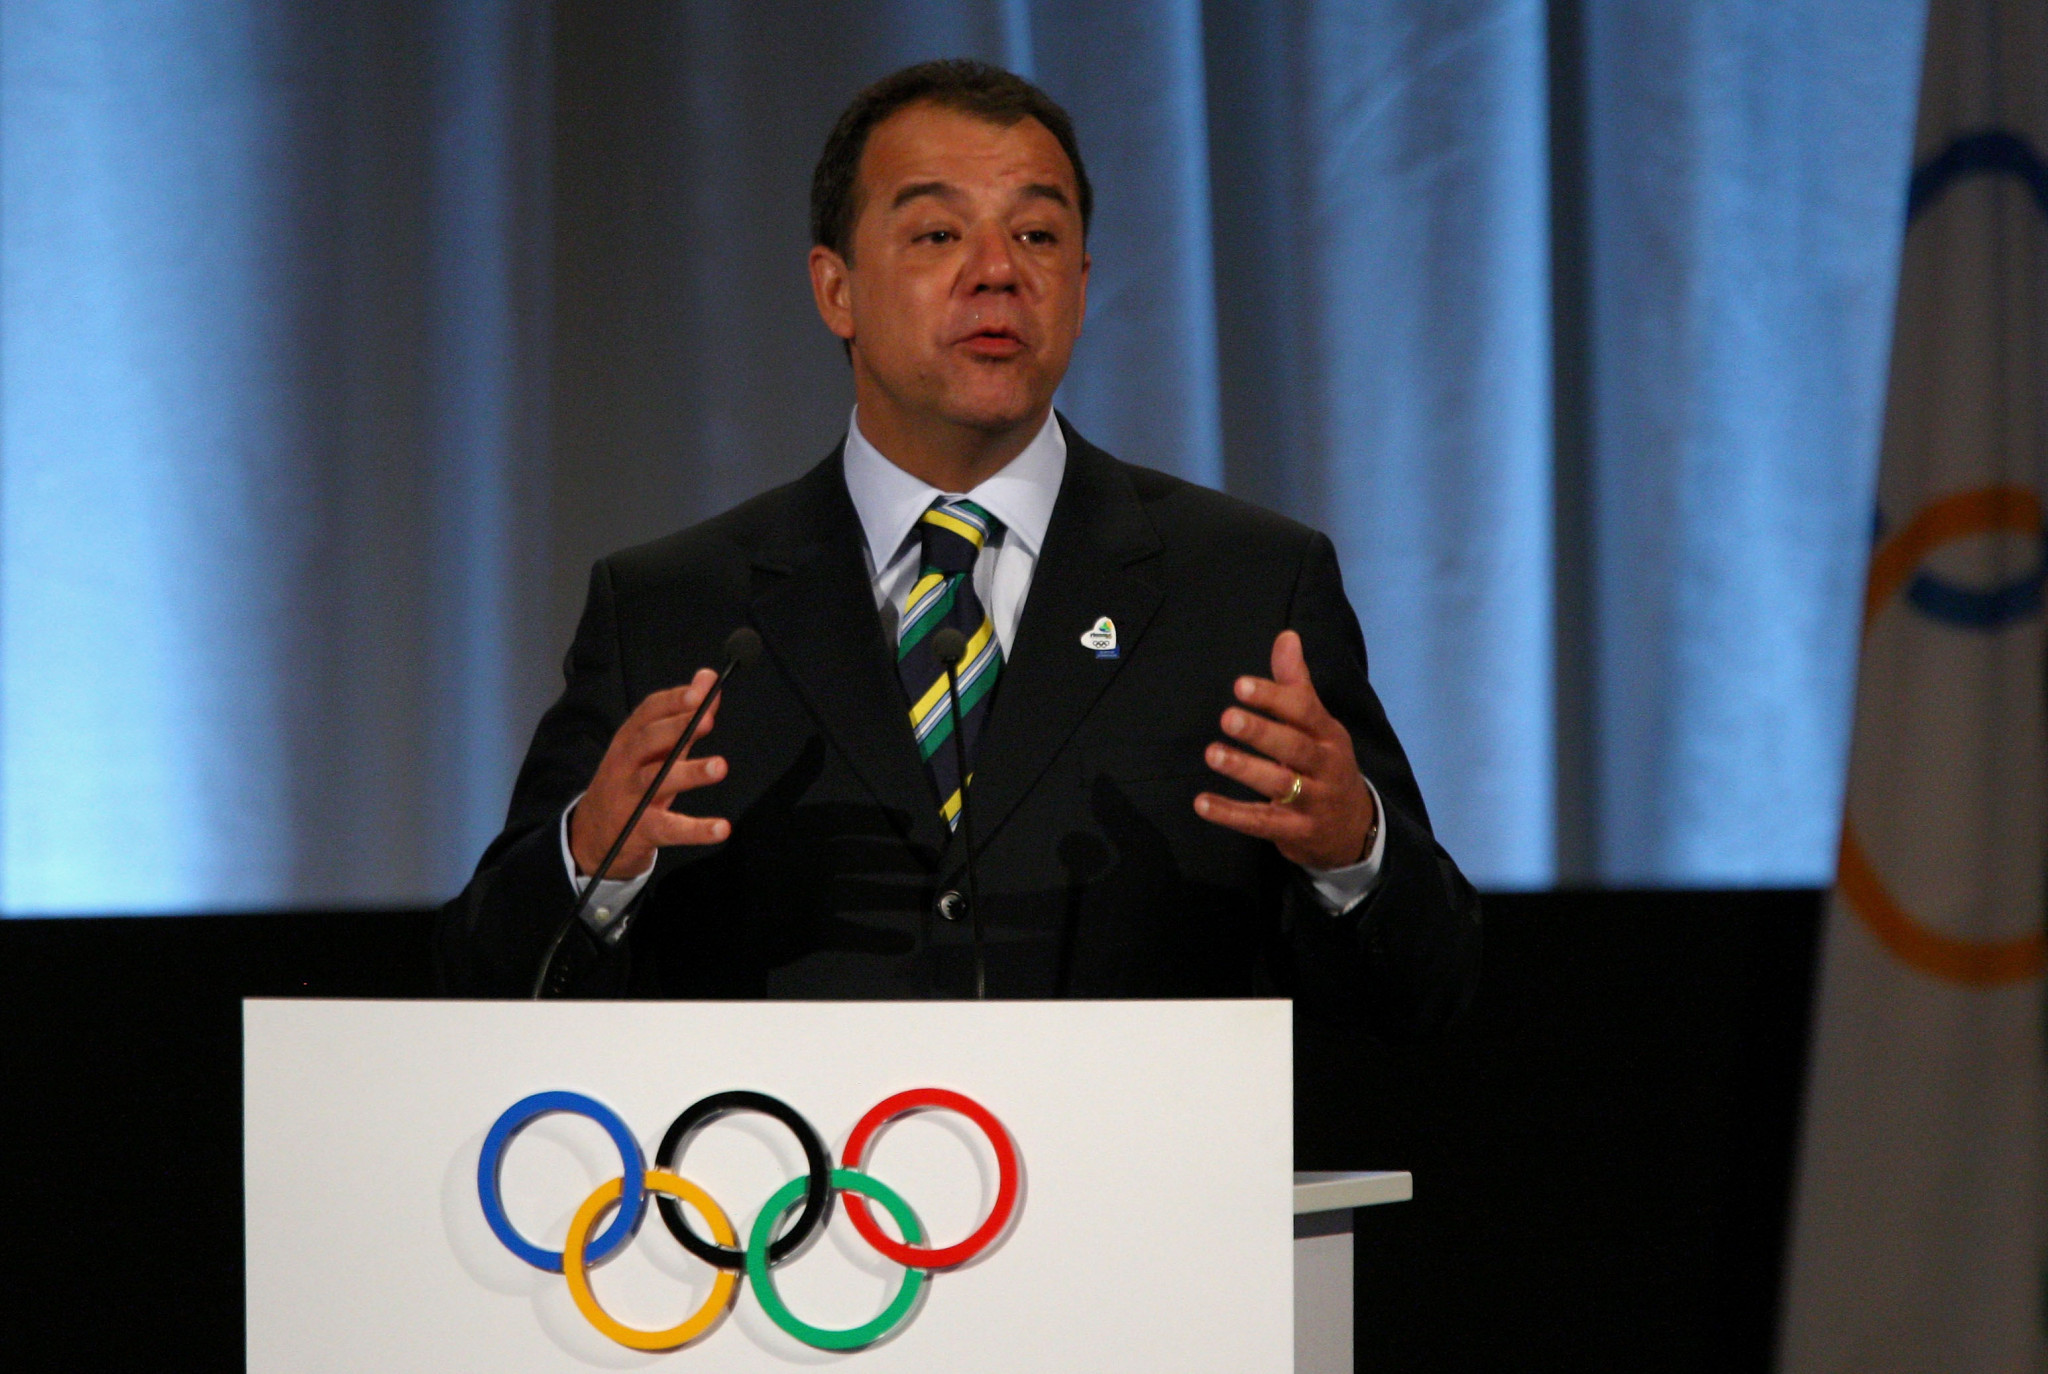 Sérgio Cabral, pictured addressing the IOC, has now been sentenced to a total of 87 years in jail after being implicated in different corruption investigations ©Getty Images